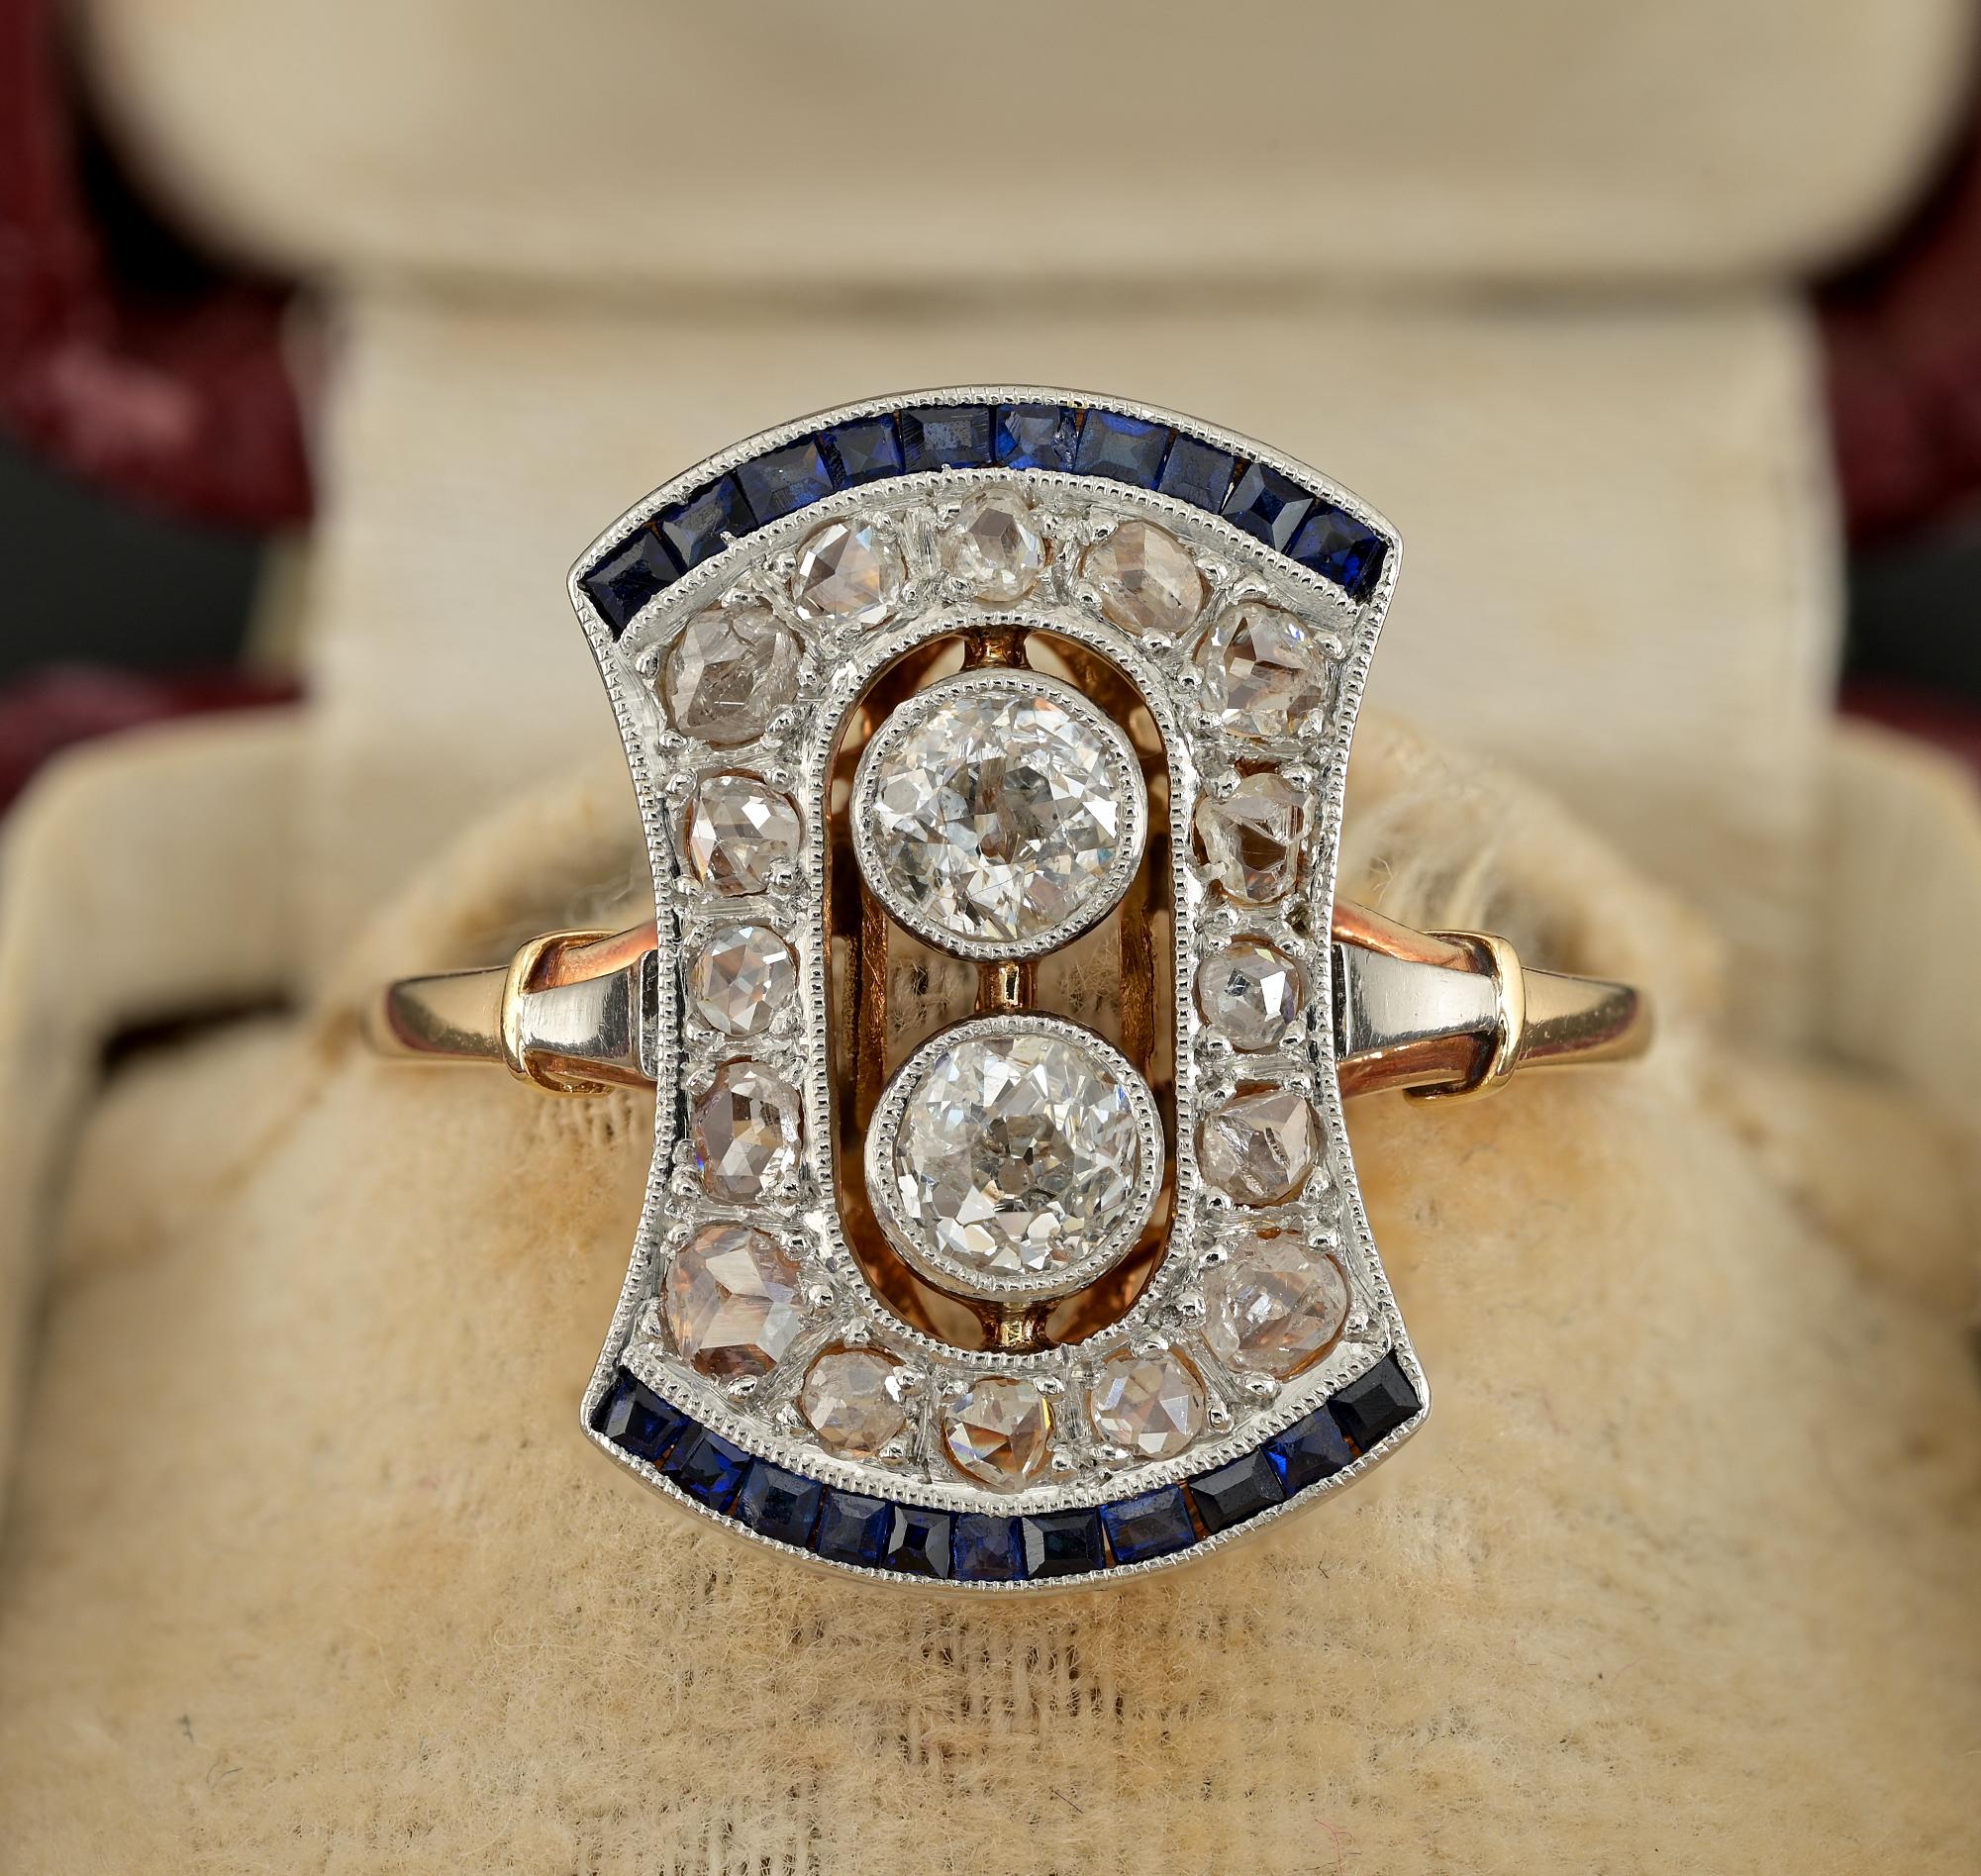 Quintessential, Edwardian ring, with charming design and gorgeous colour contrast
Very finely hand crafted during the very beginning of 1900 of 18 KT gold with Platinum top – tested
Flat profile of enchanting crown shape, sinuous and elegant,